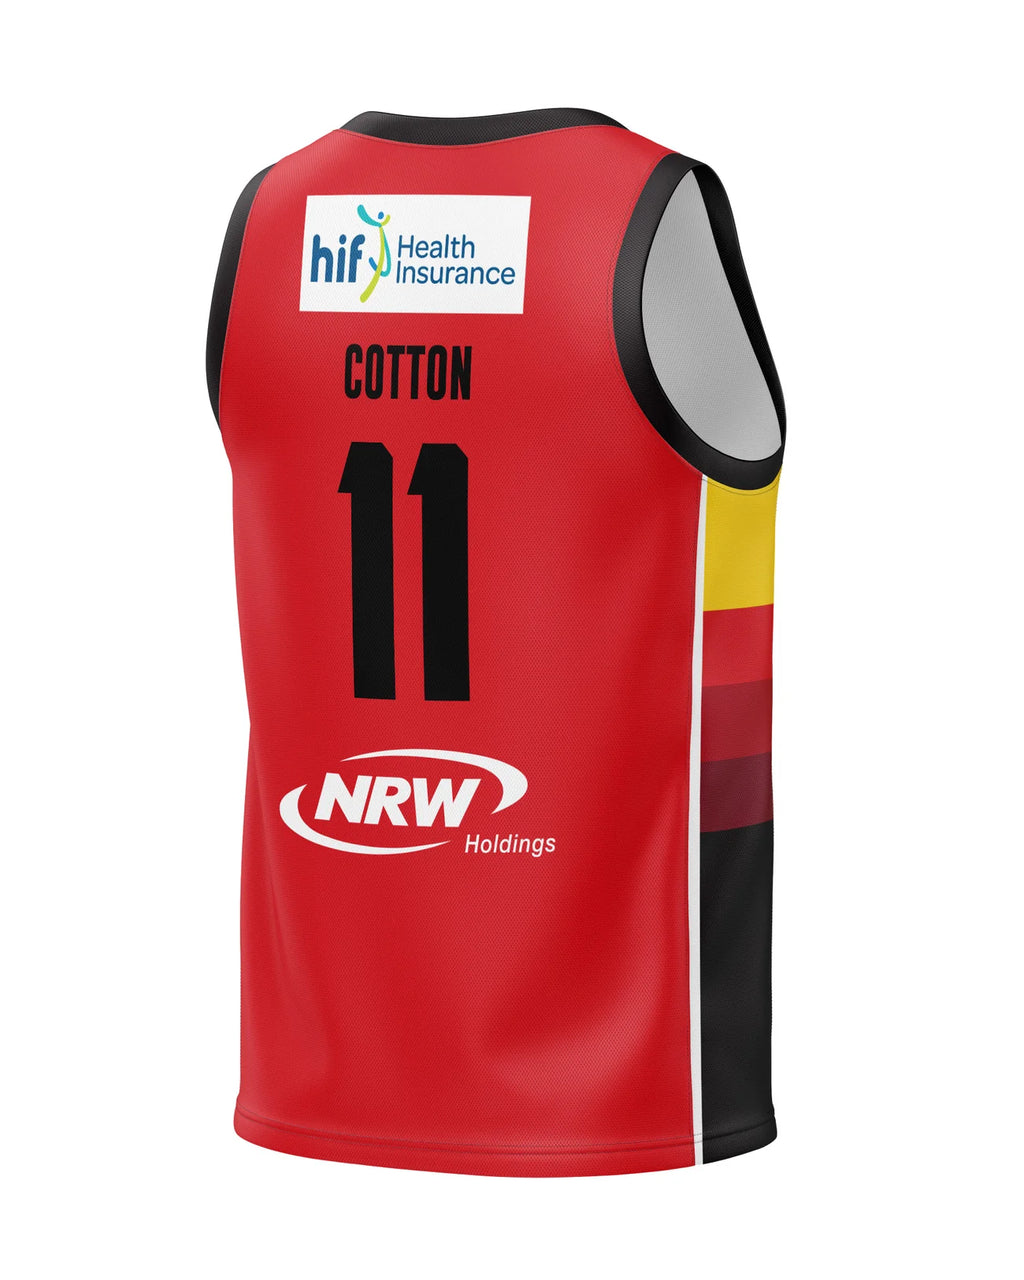 Perth Wildcats 23/24 Home Replica Jersey - Bryce Cotton (Red)